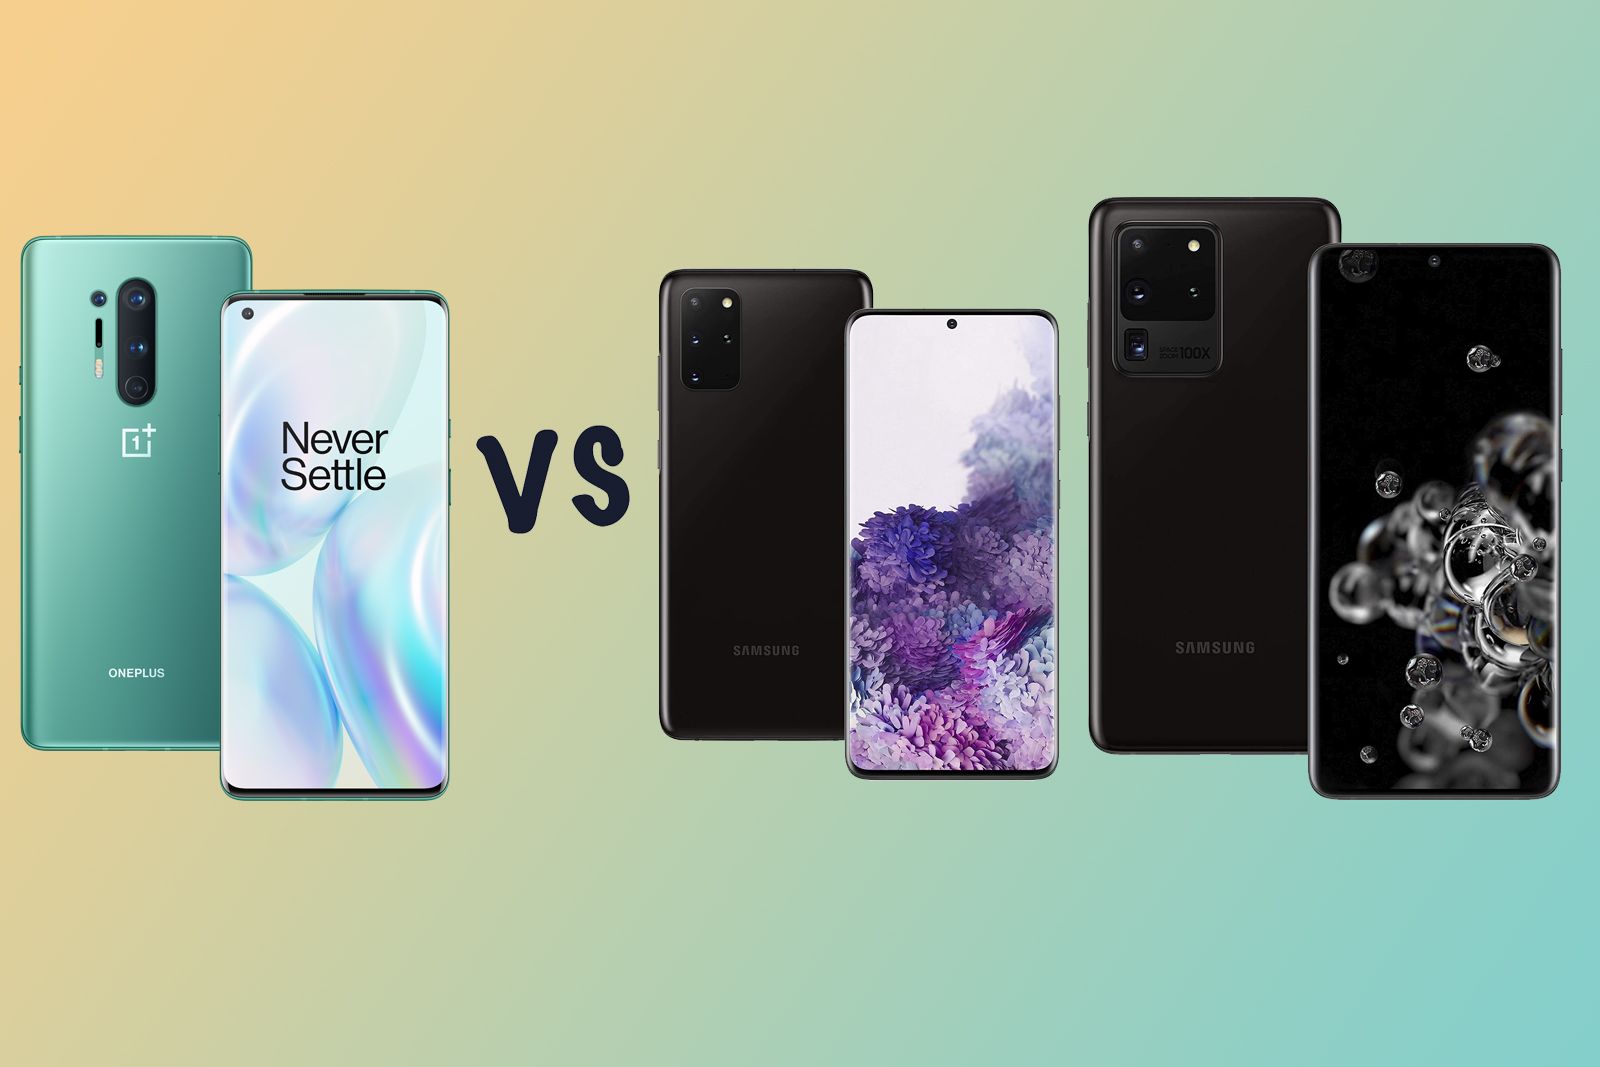 Oneplus 8 Pro Vs Samsung Galaxy S20 Vs Galaxy S20 Ultra Whats The Difference image 1